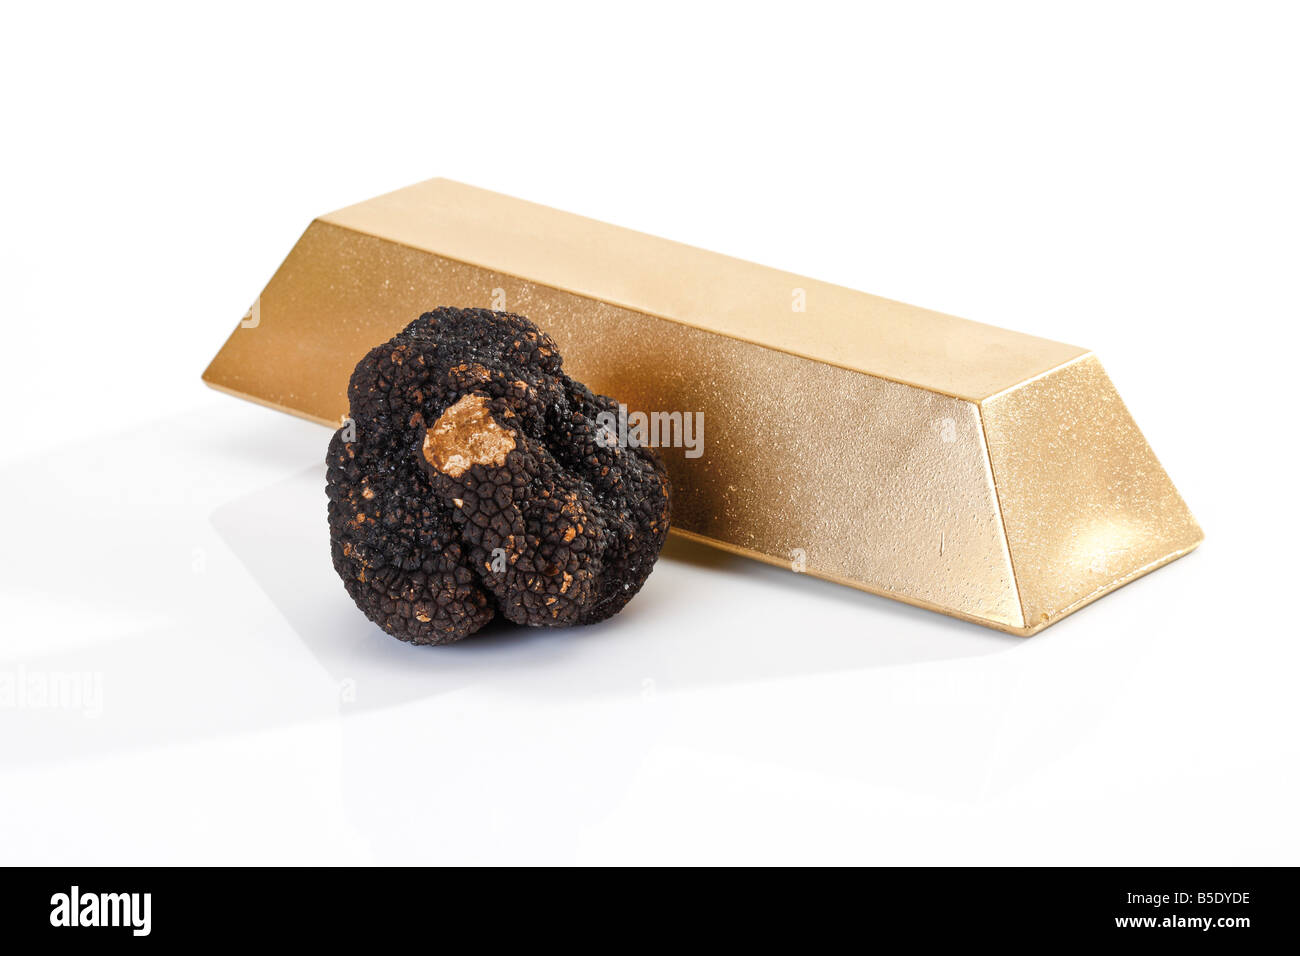 Black Truffle and gold bar, close-up Stock Photo